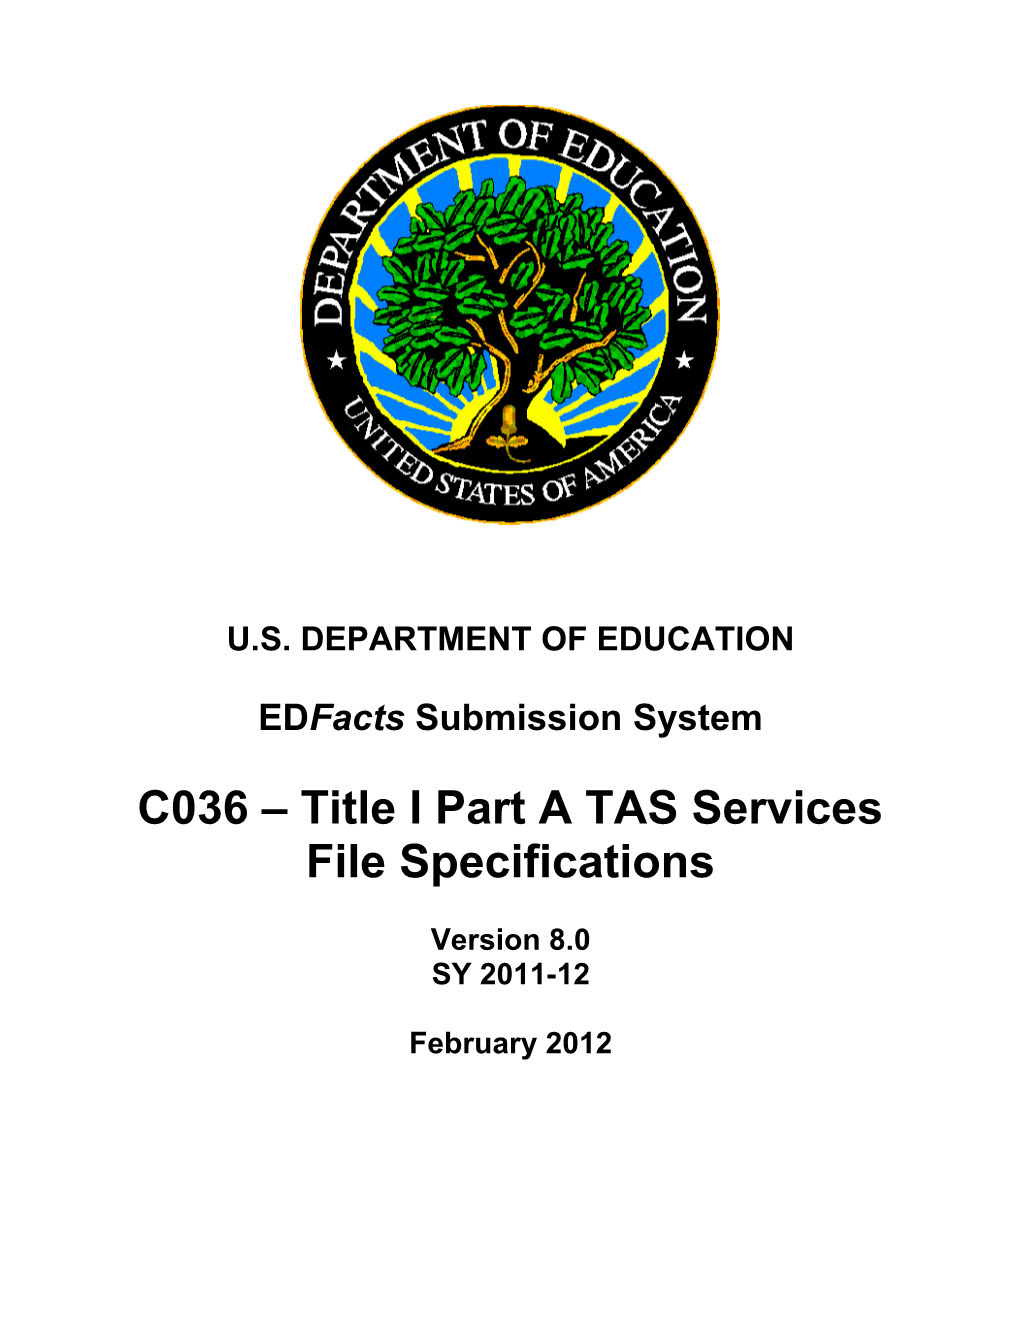 Title I Part a TAS Services File Specifications